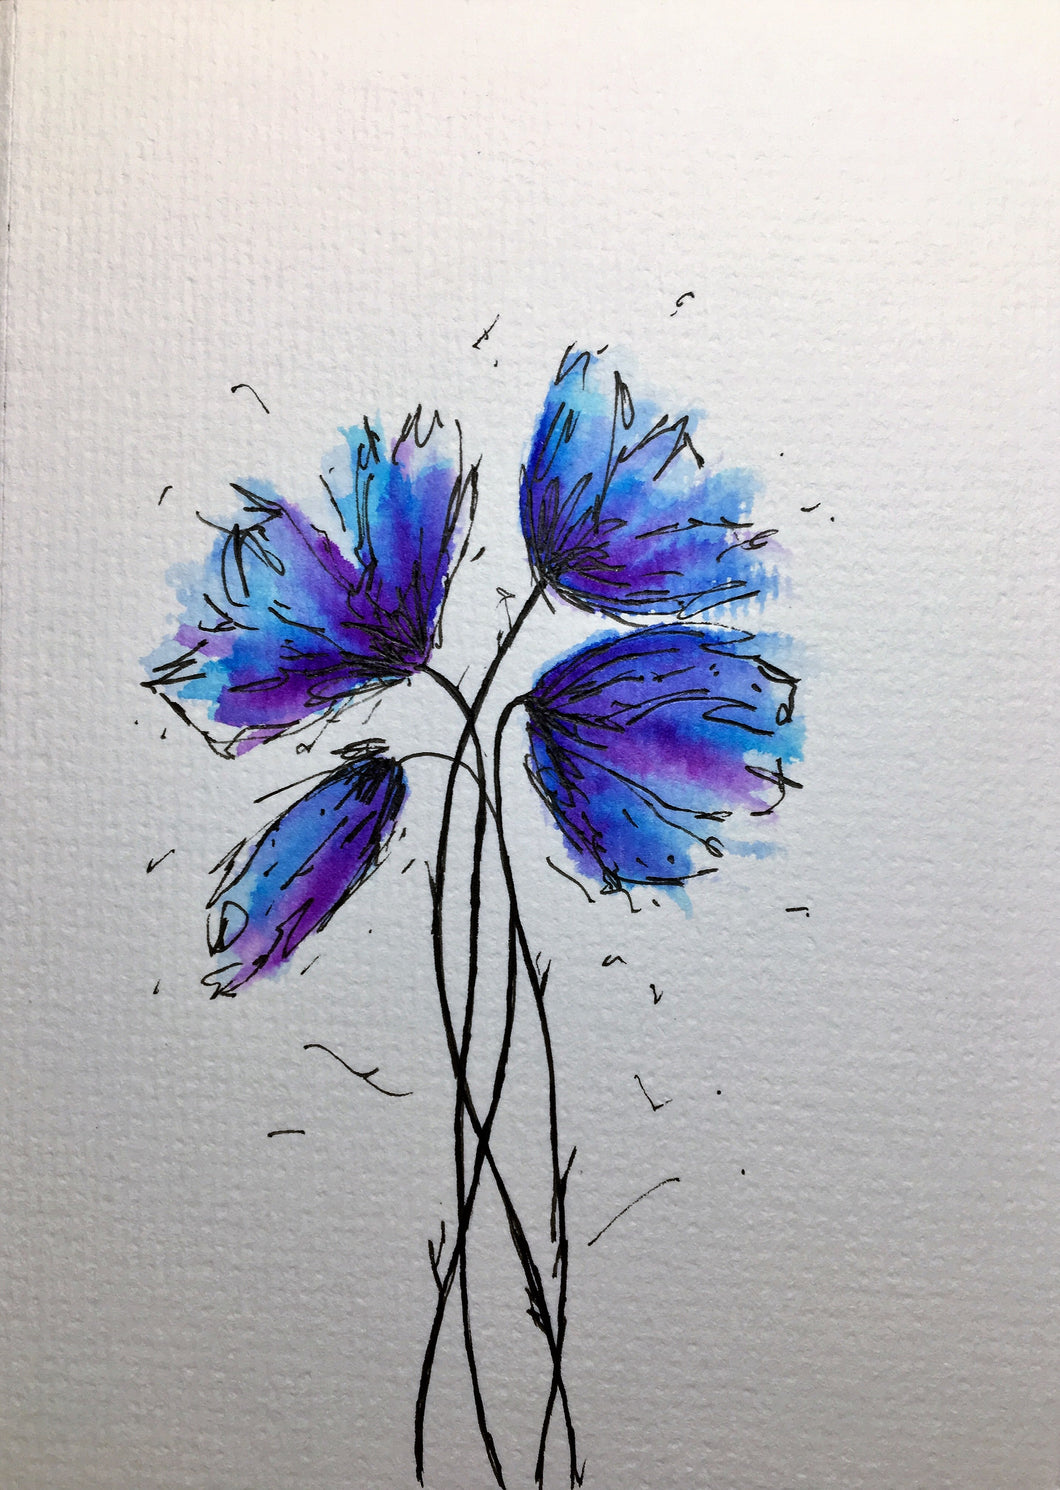 Handpainted Watercolour Greeting Card - Abstract Purple, Blue and Turquoise Poppies Design - eDgE dEsiGn London